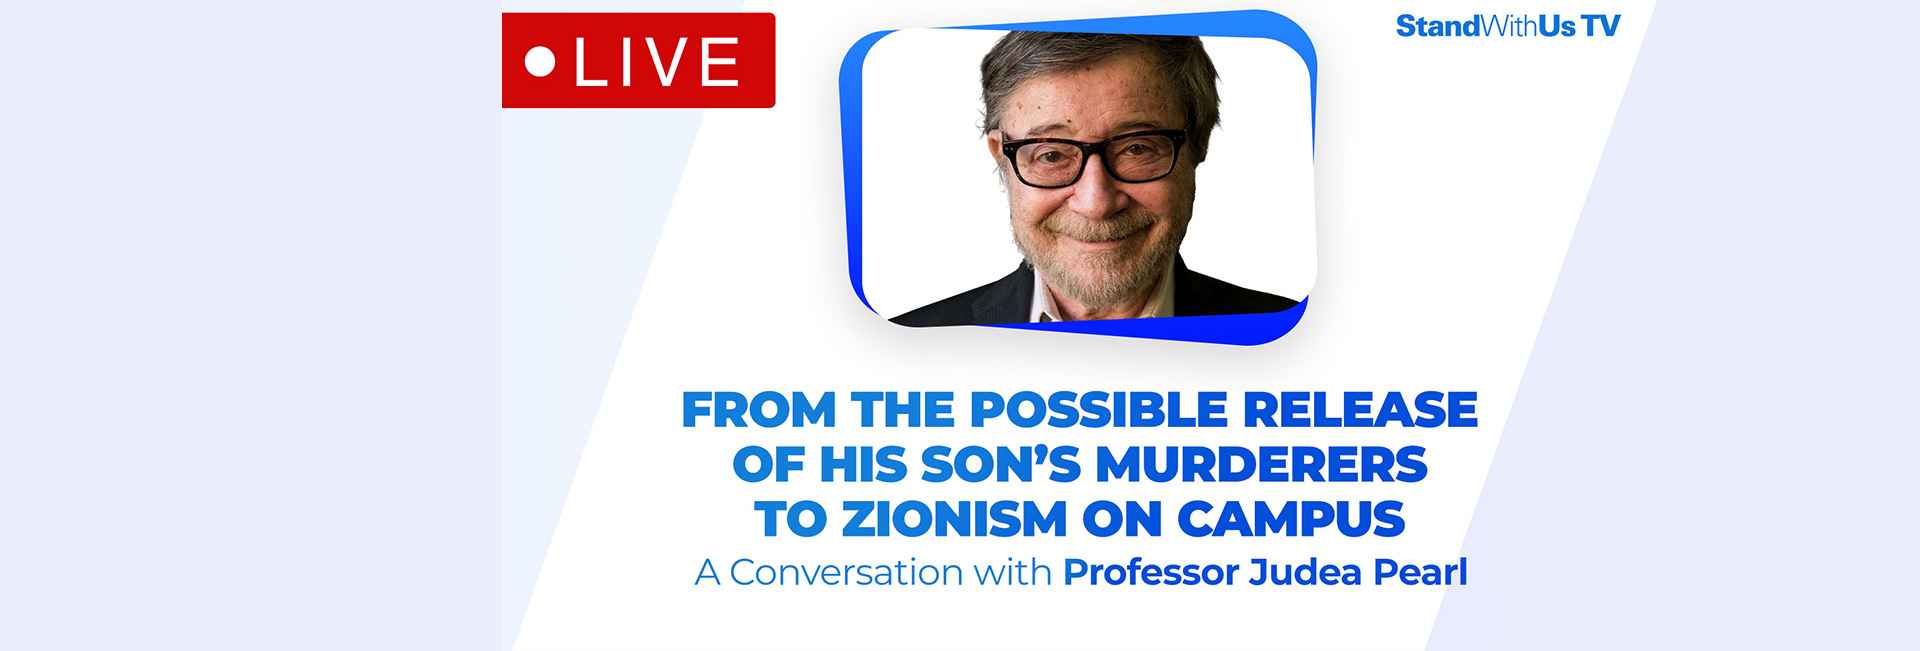 From The Possible Release of his son’s Murderers to Zionism on Campus: Professor Judea Pearl